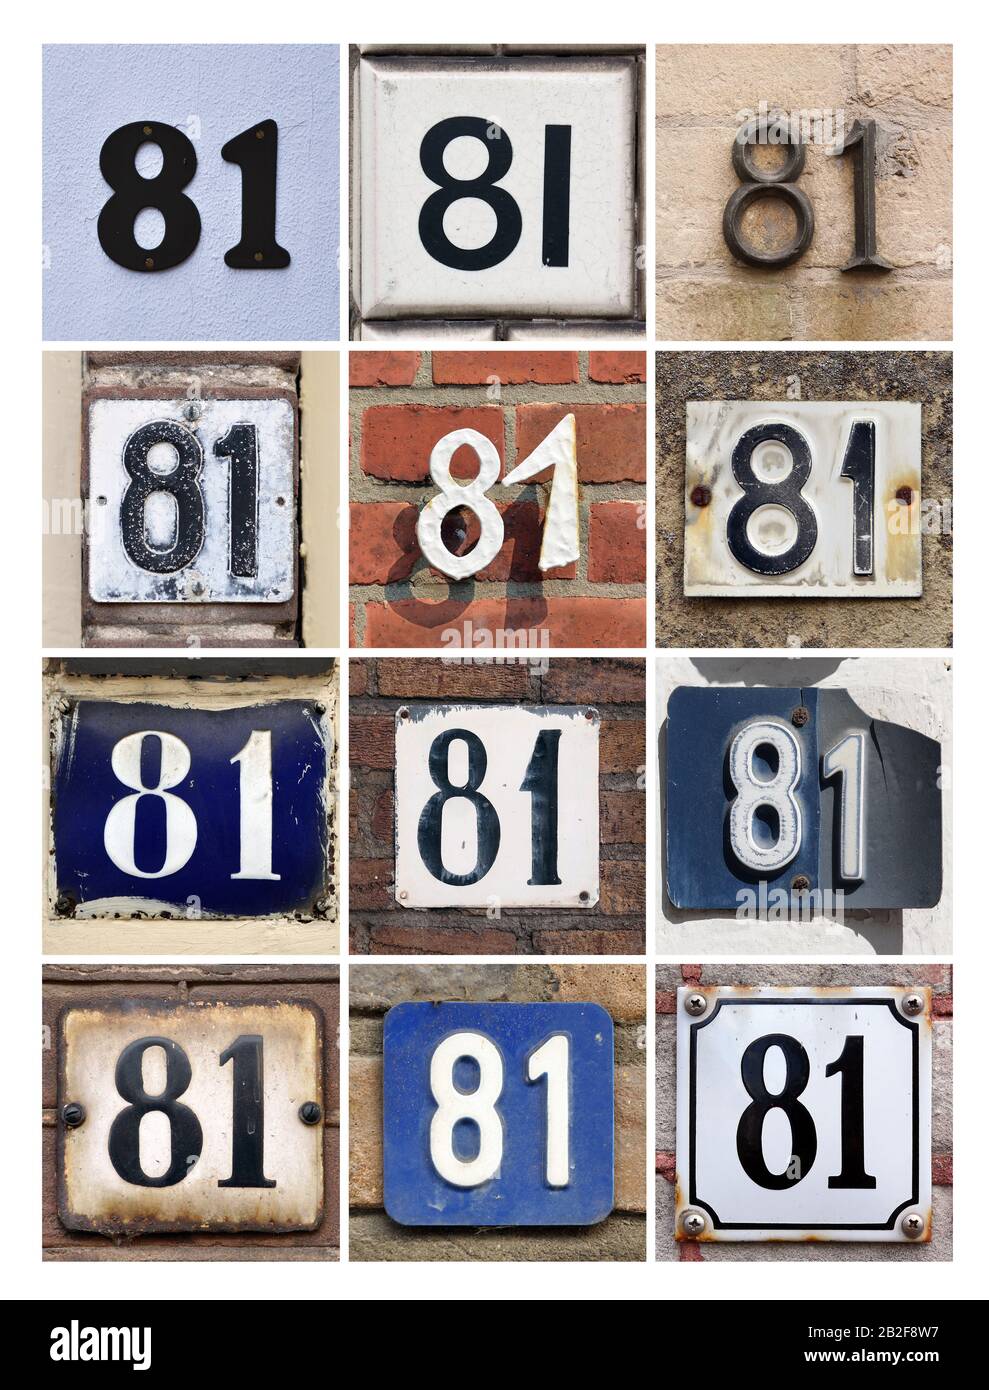 number-81-sign-collage-of-house-numbers-eighty-one-2B2F8W7.jpg